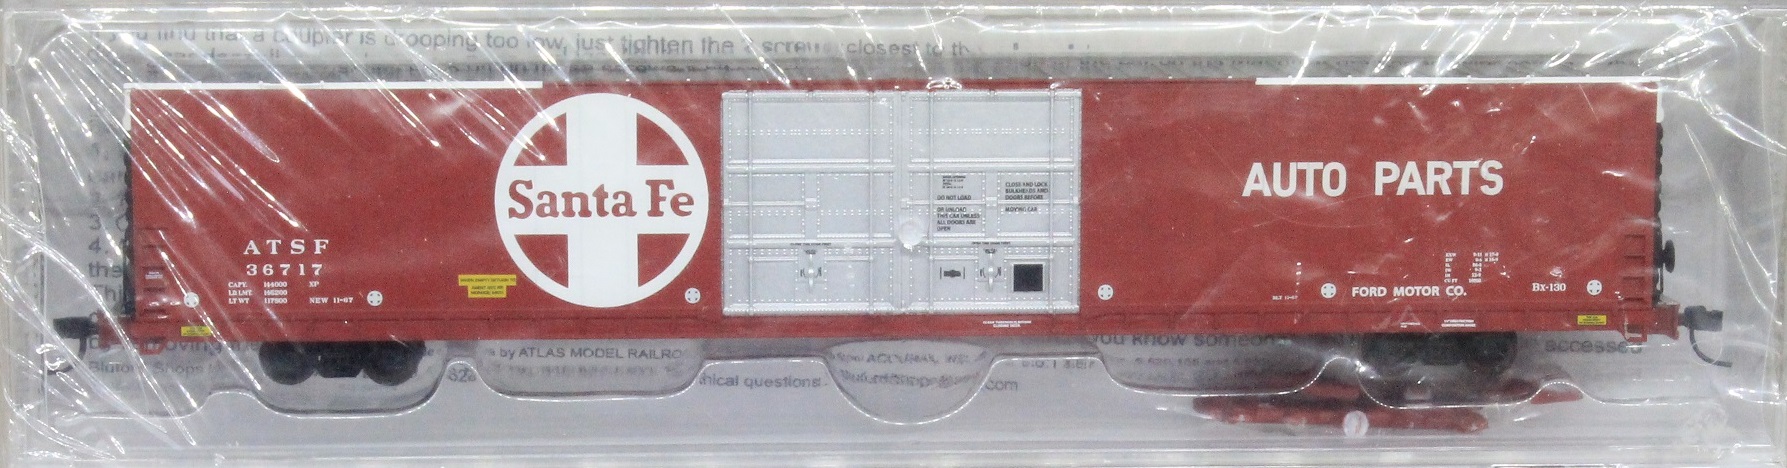 N Scale - Bluford Shops - 86492-A - Boxcar, 85 or 86 Foot, Auto Parts - Santa Fe - 36717